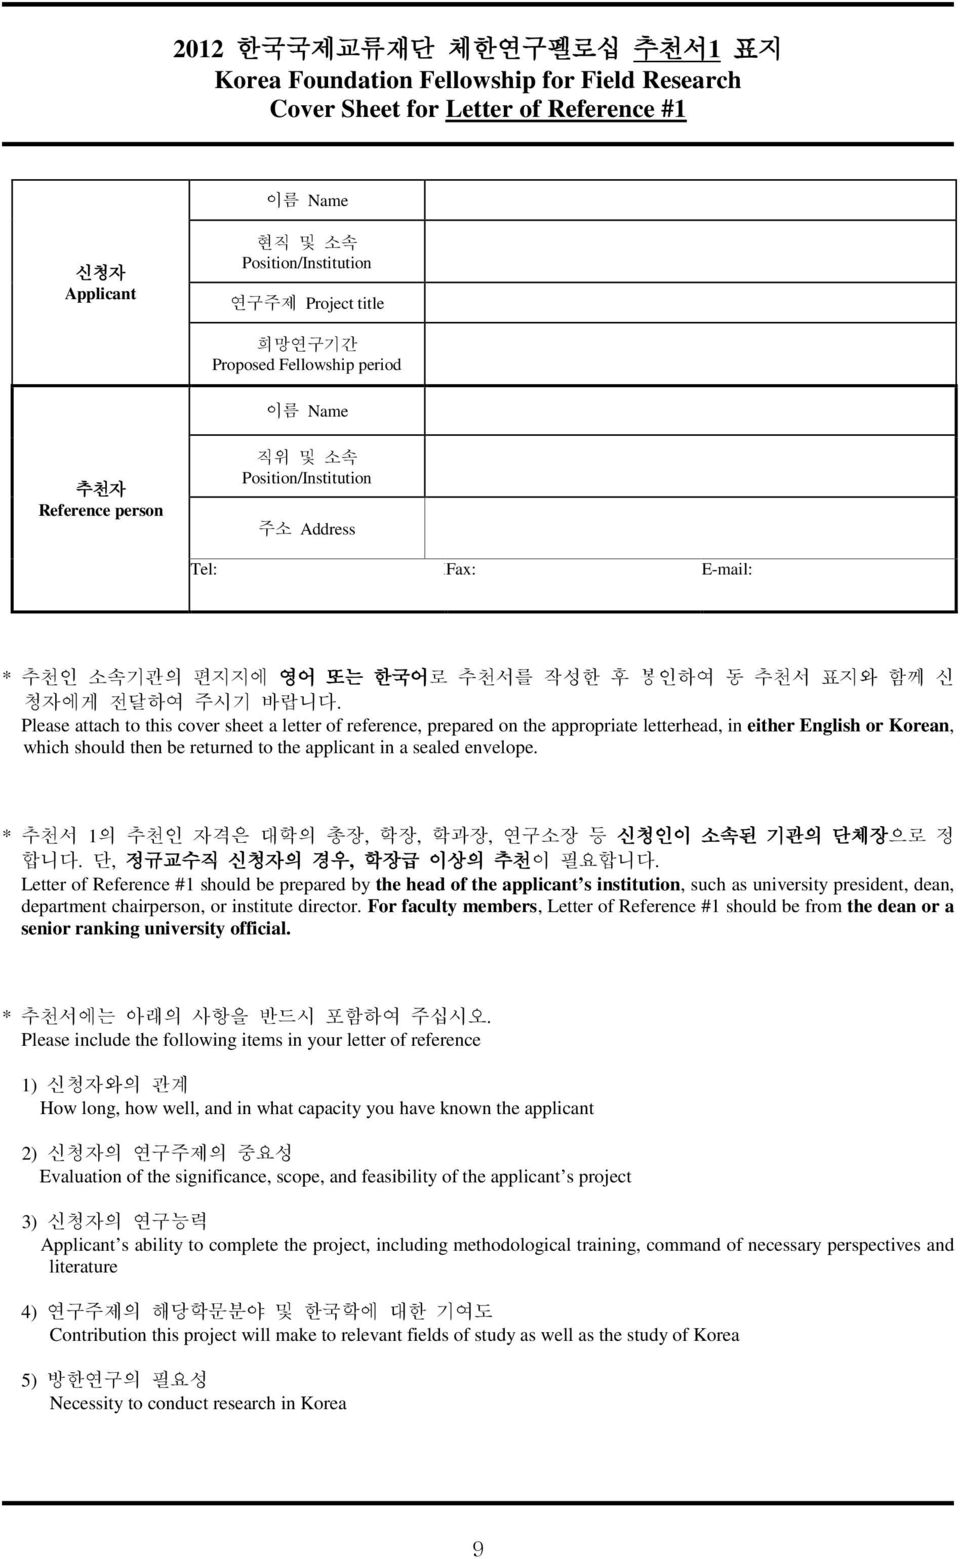 Please attach to this cover sheet a letter of reference, prepared on the appropriate letterhead, in either English or Korean, which should then be returned to the applicant in a sealed envelope.